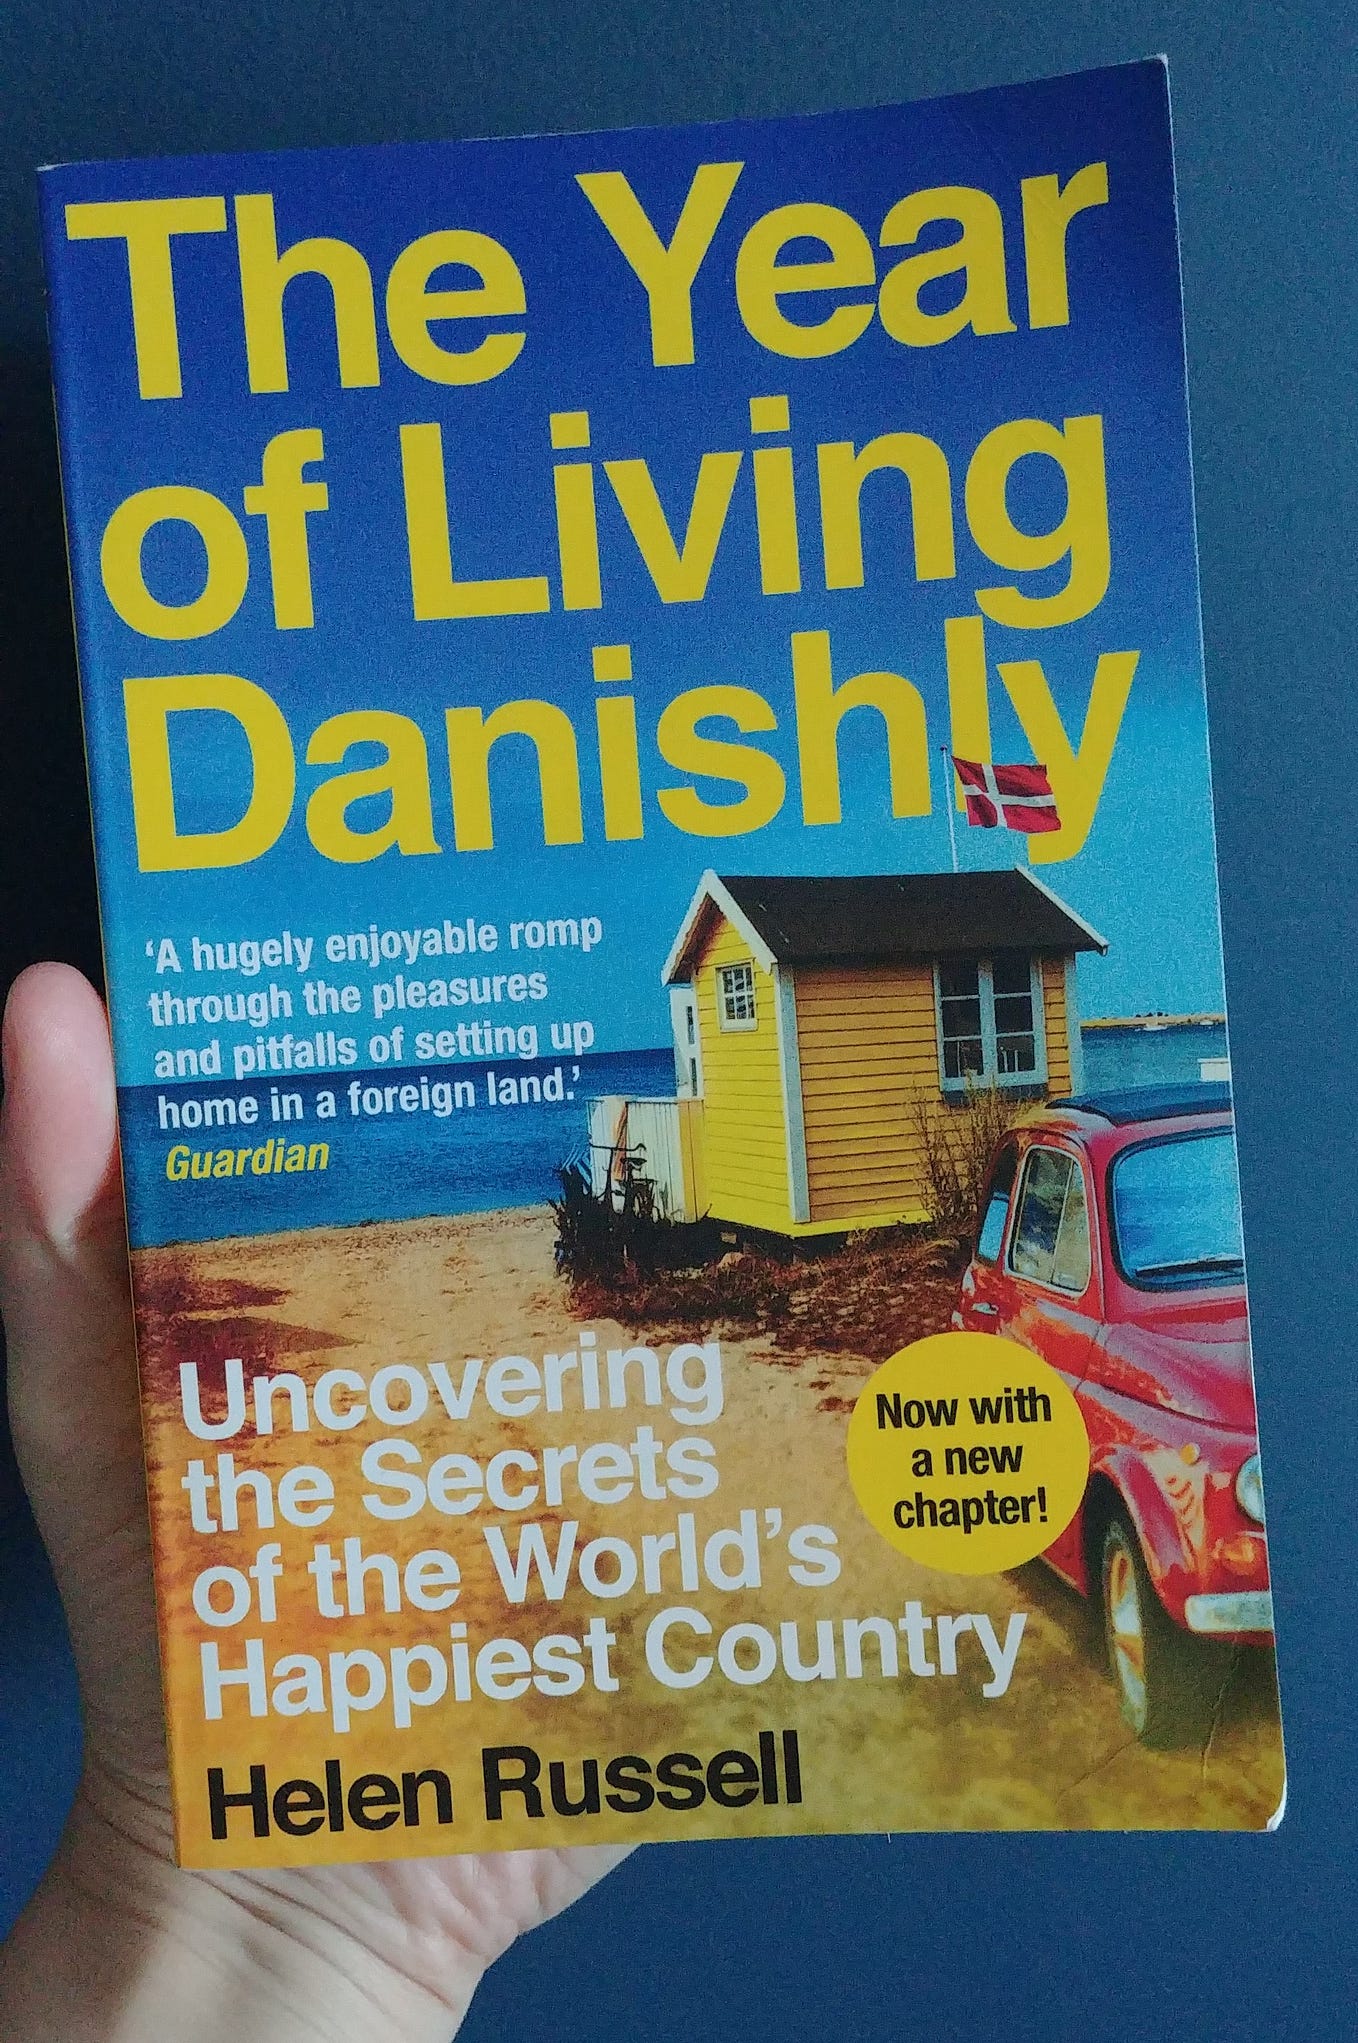 Read, Review, Travel: The Year of Living Danishly